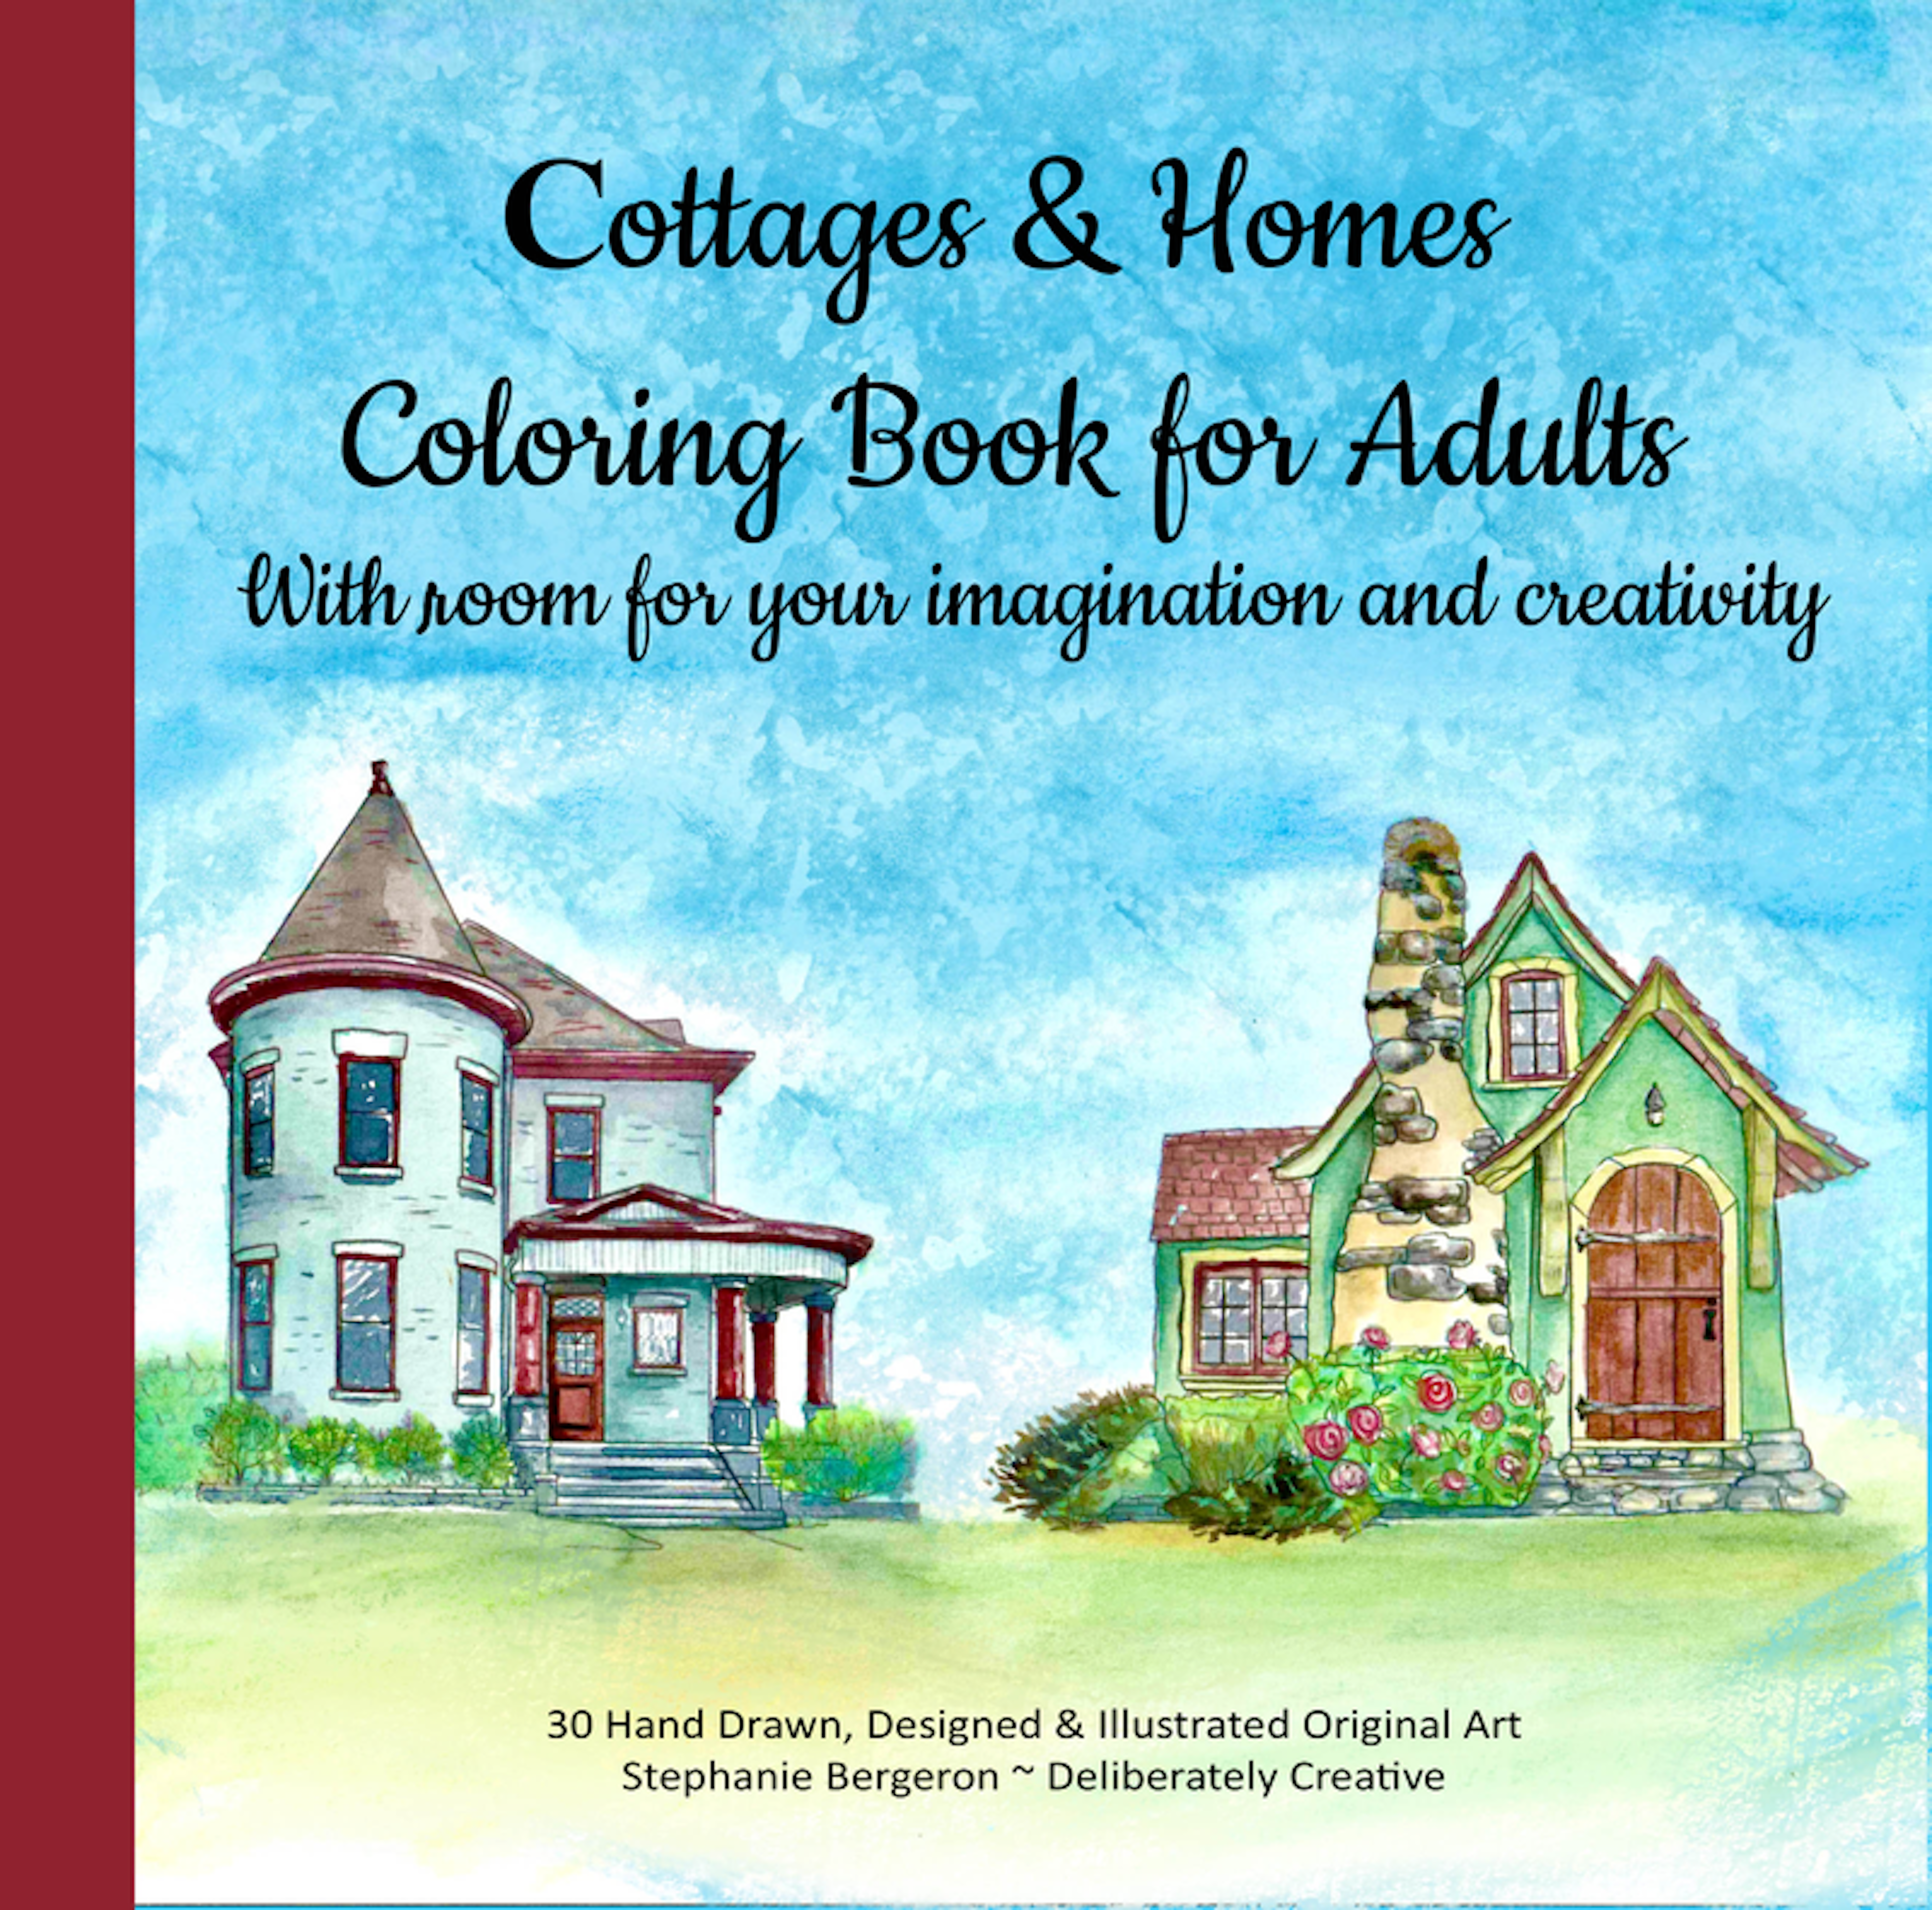 Cottages & Homes Adult Coloring Book 